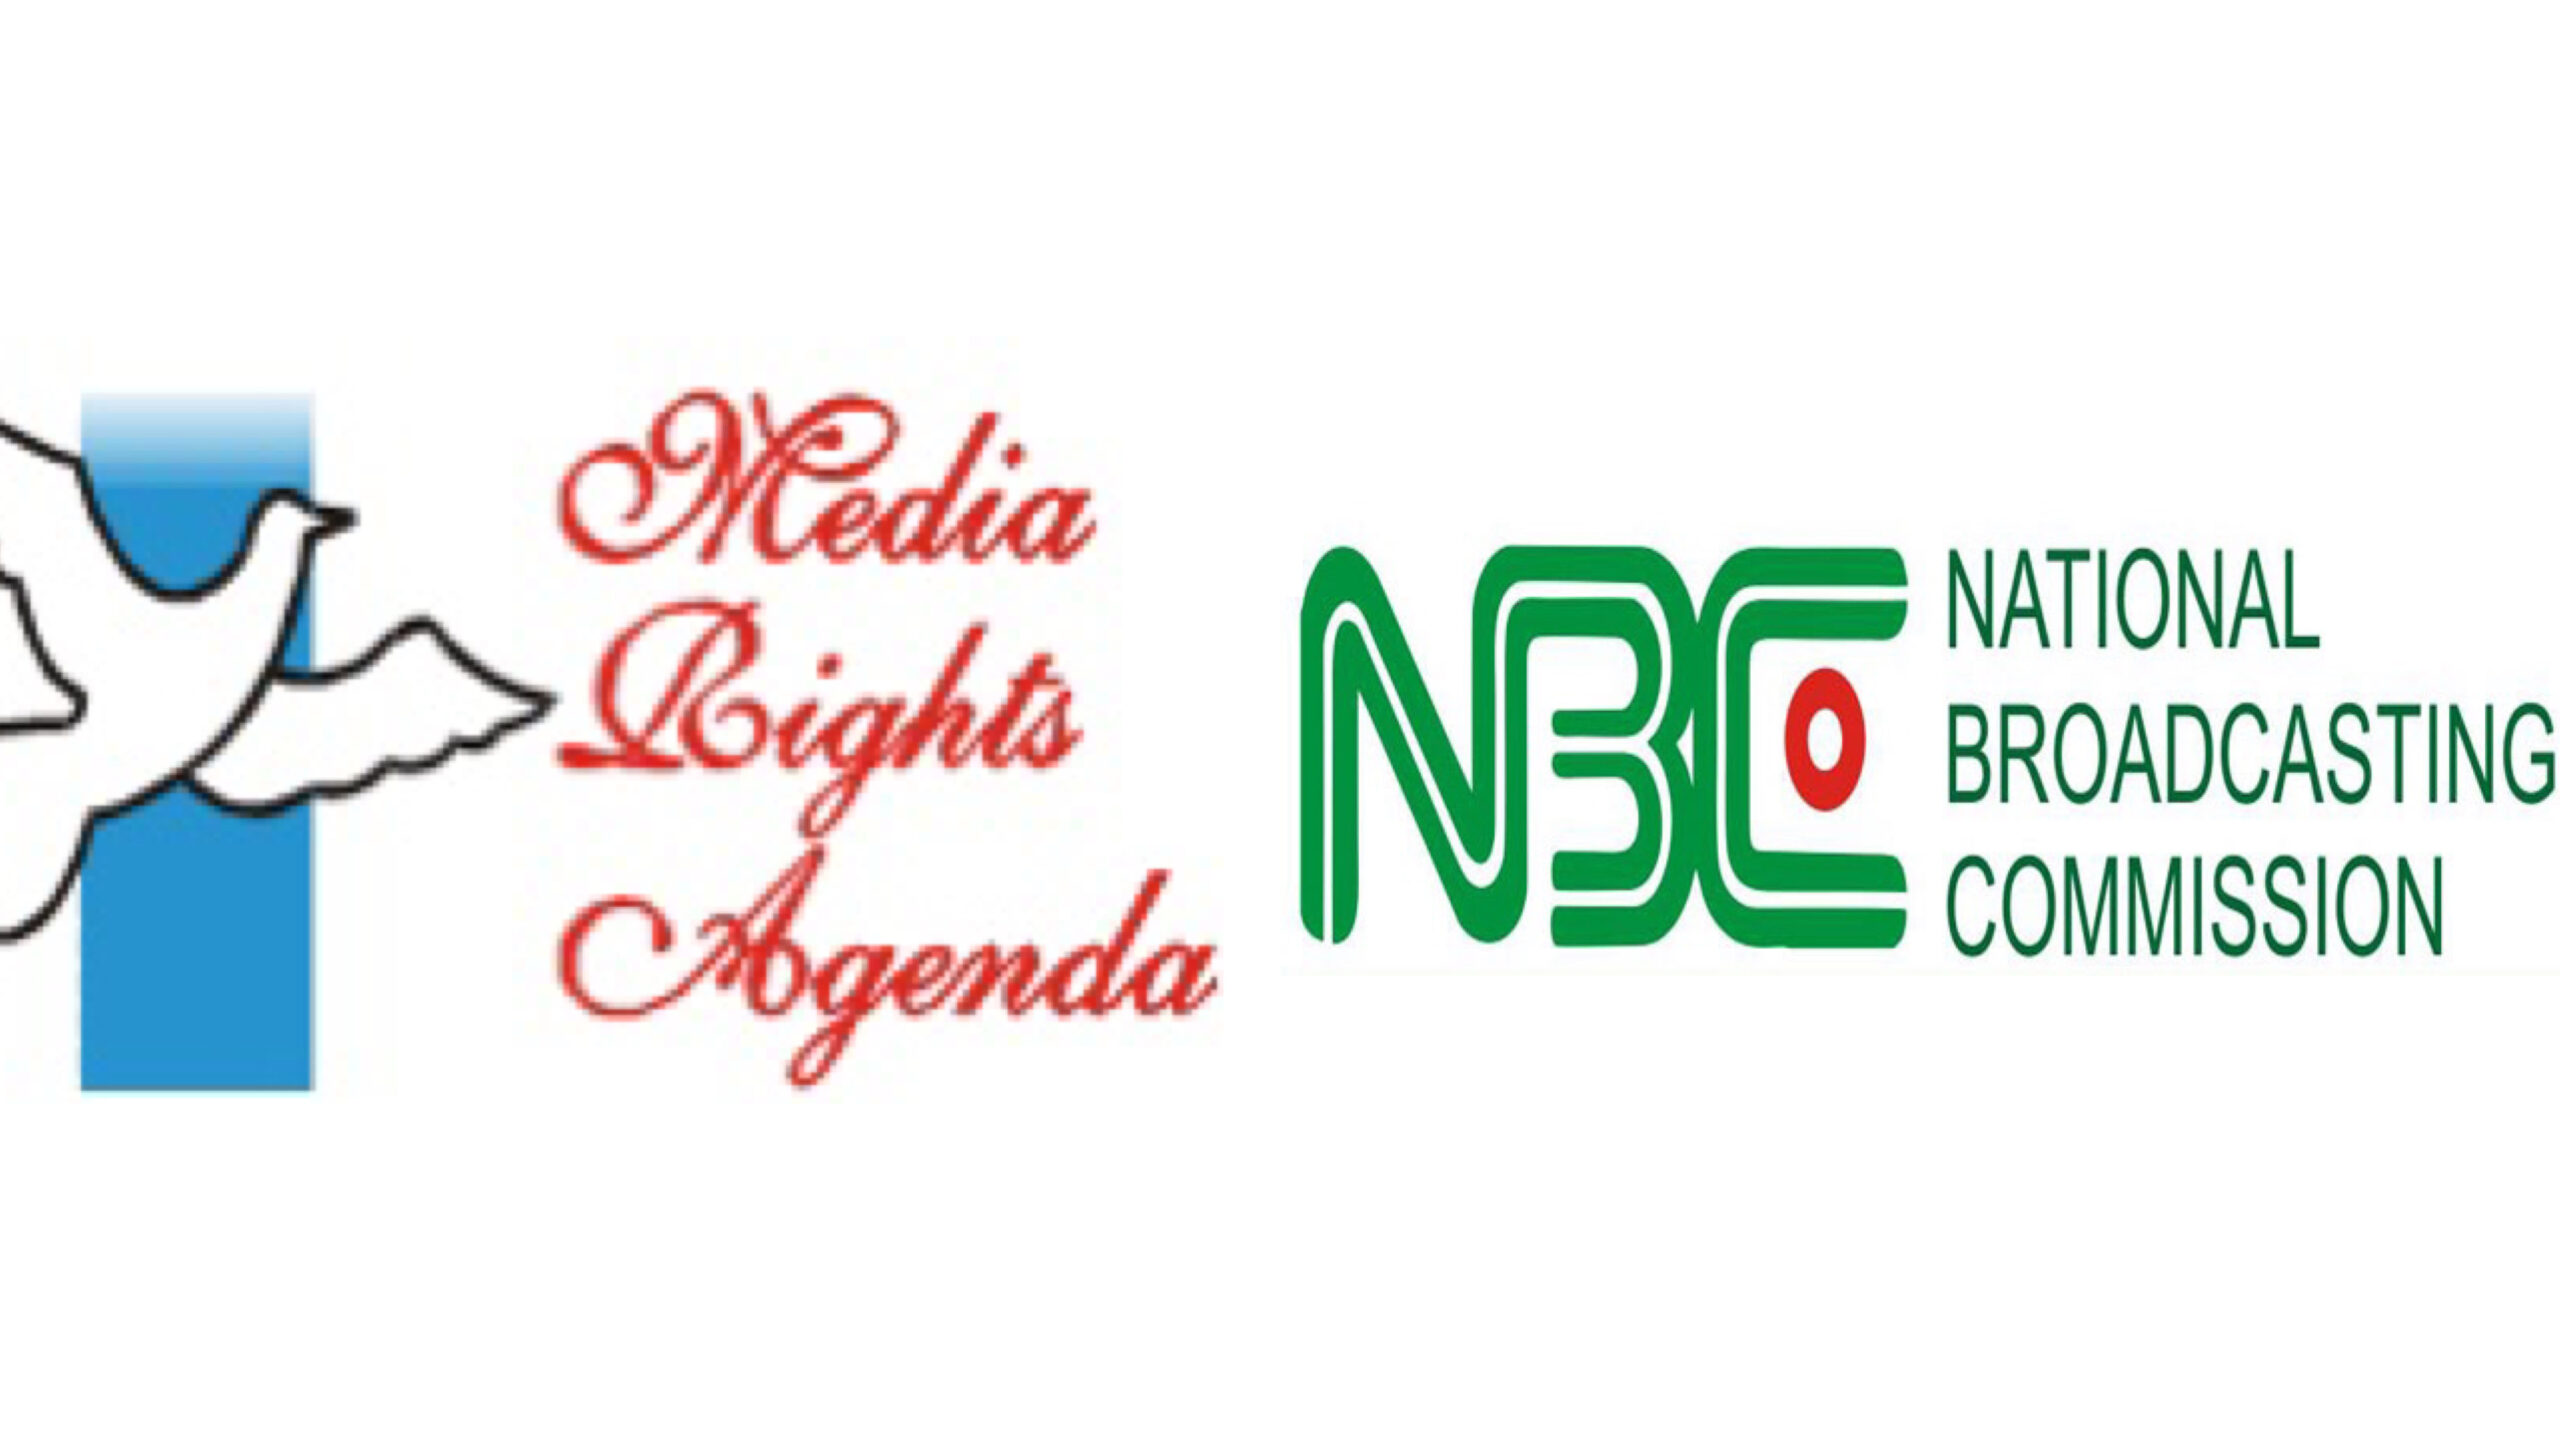 MRA files Freedom of Information suit against NBC